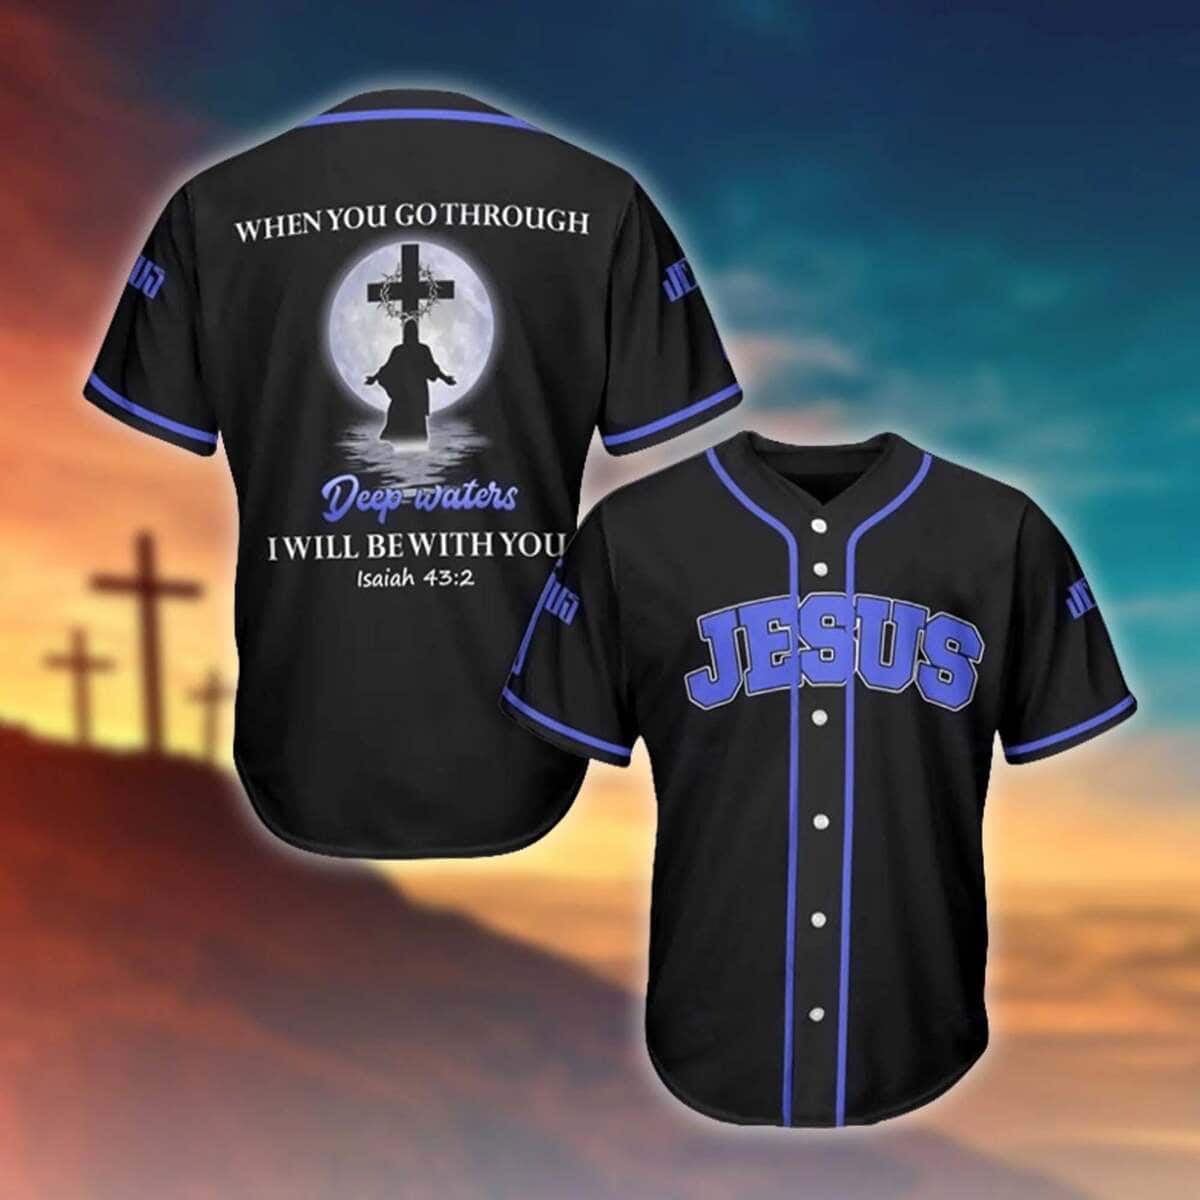 Jesus Baseball Jersey When You Go Through Deep Waters I Will Be With You